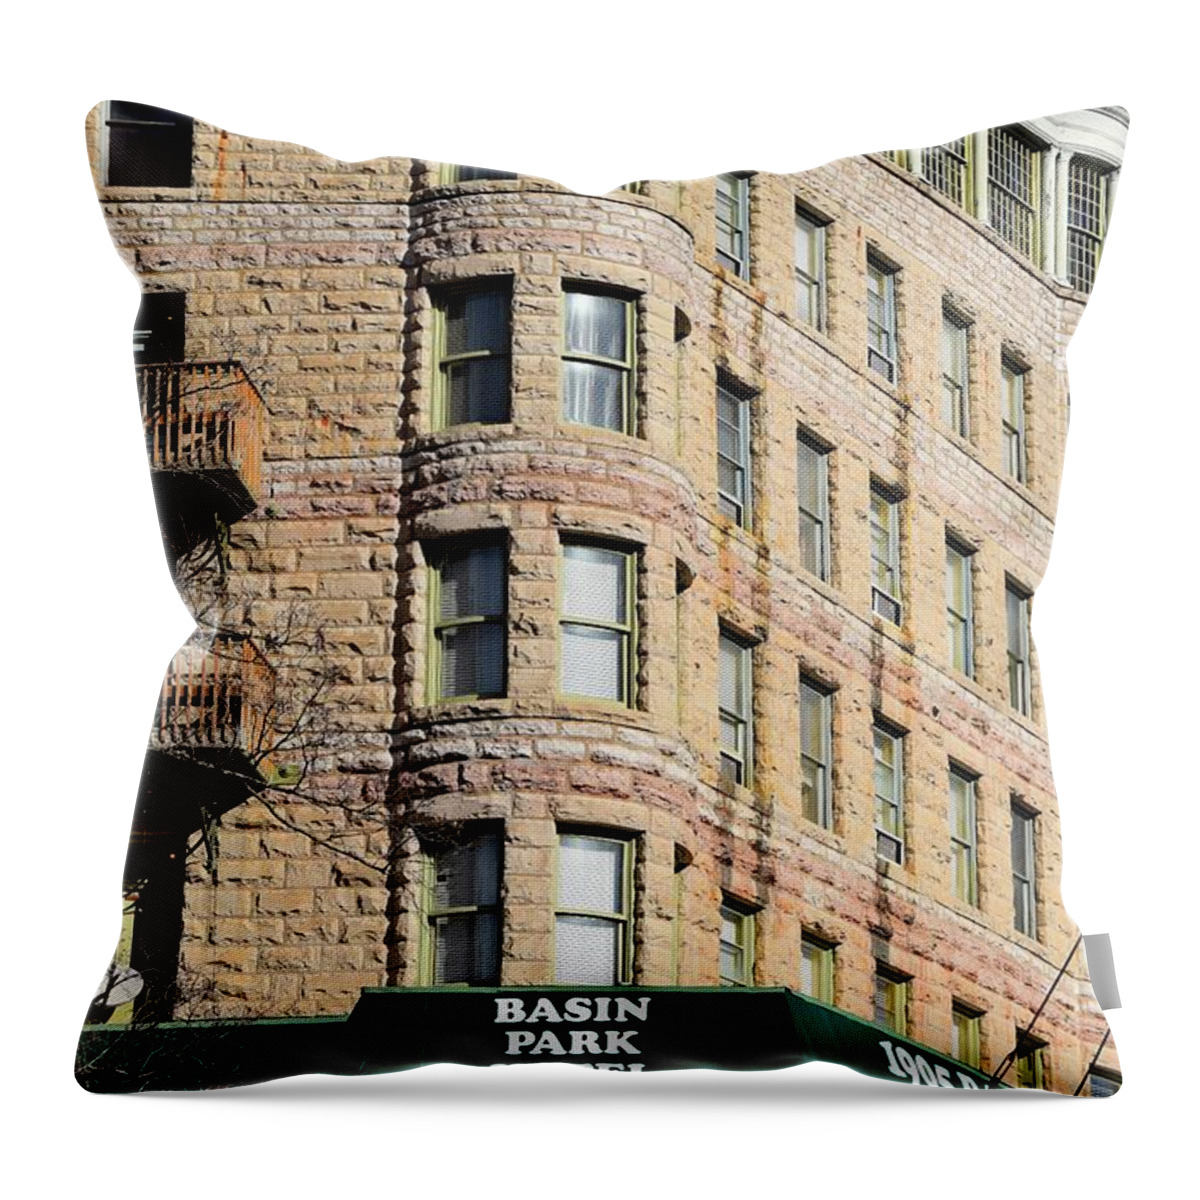 Hotl Throw Pillow featuring the photograph Todays art 3882 Basin Park Hotel by Lawrence Hess